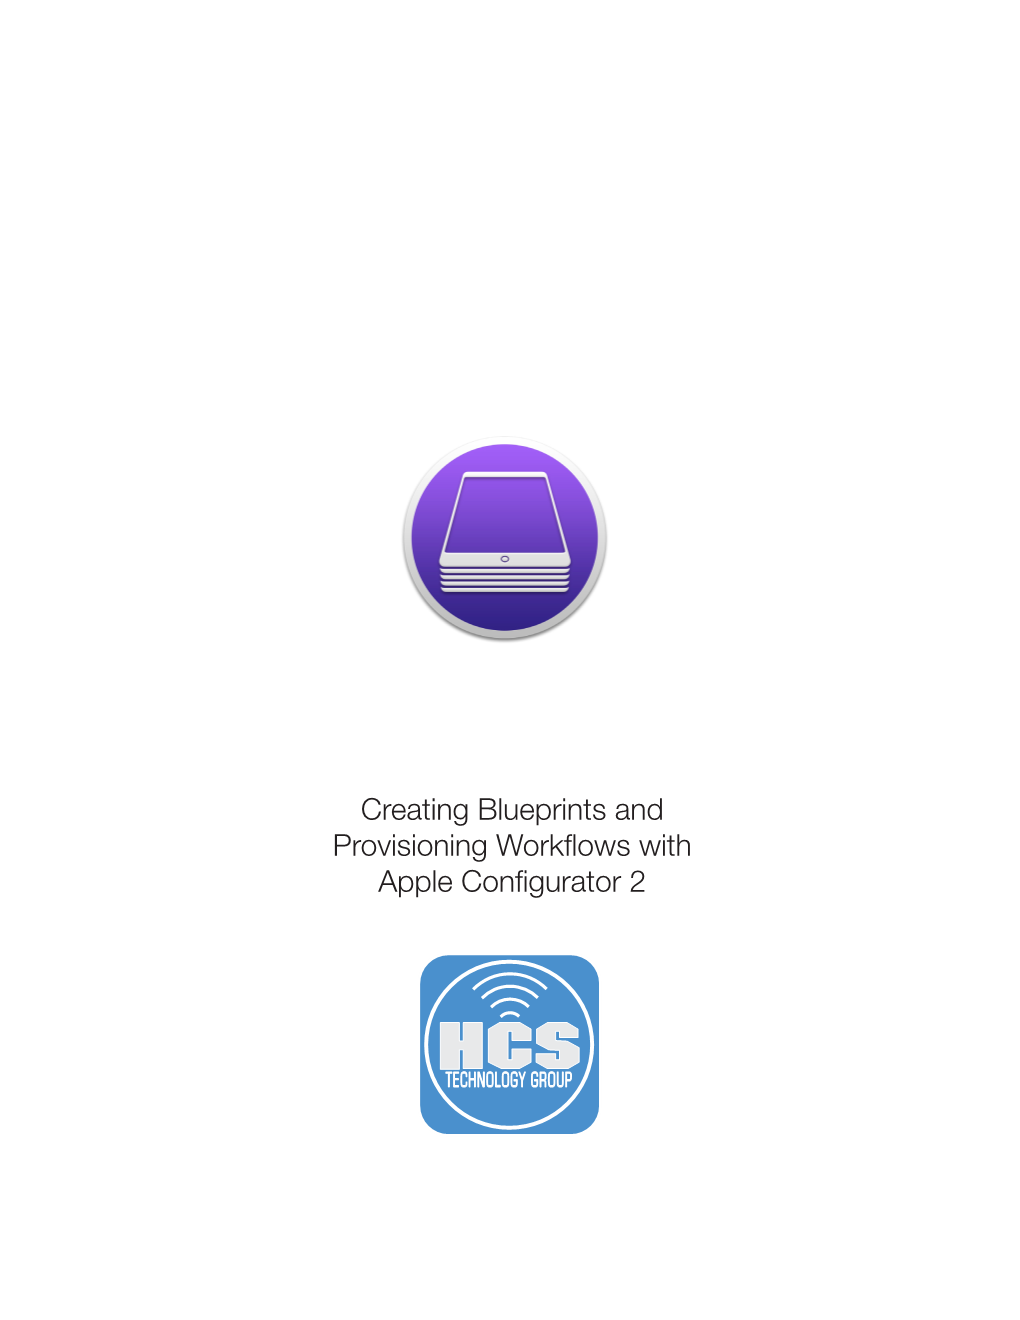 Creating Blueprints and Provisioning Workflows with Apple Configurator 2 Contents Preface